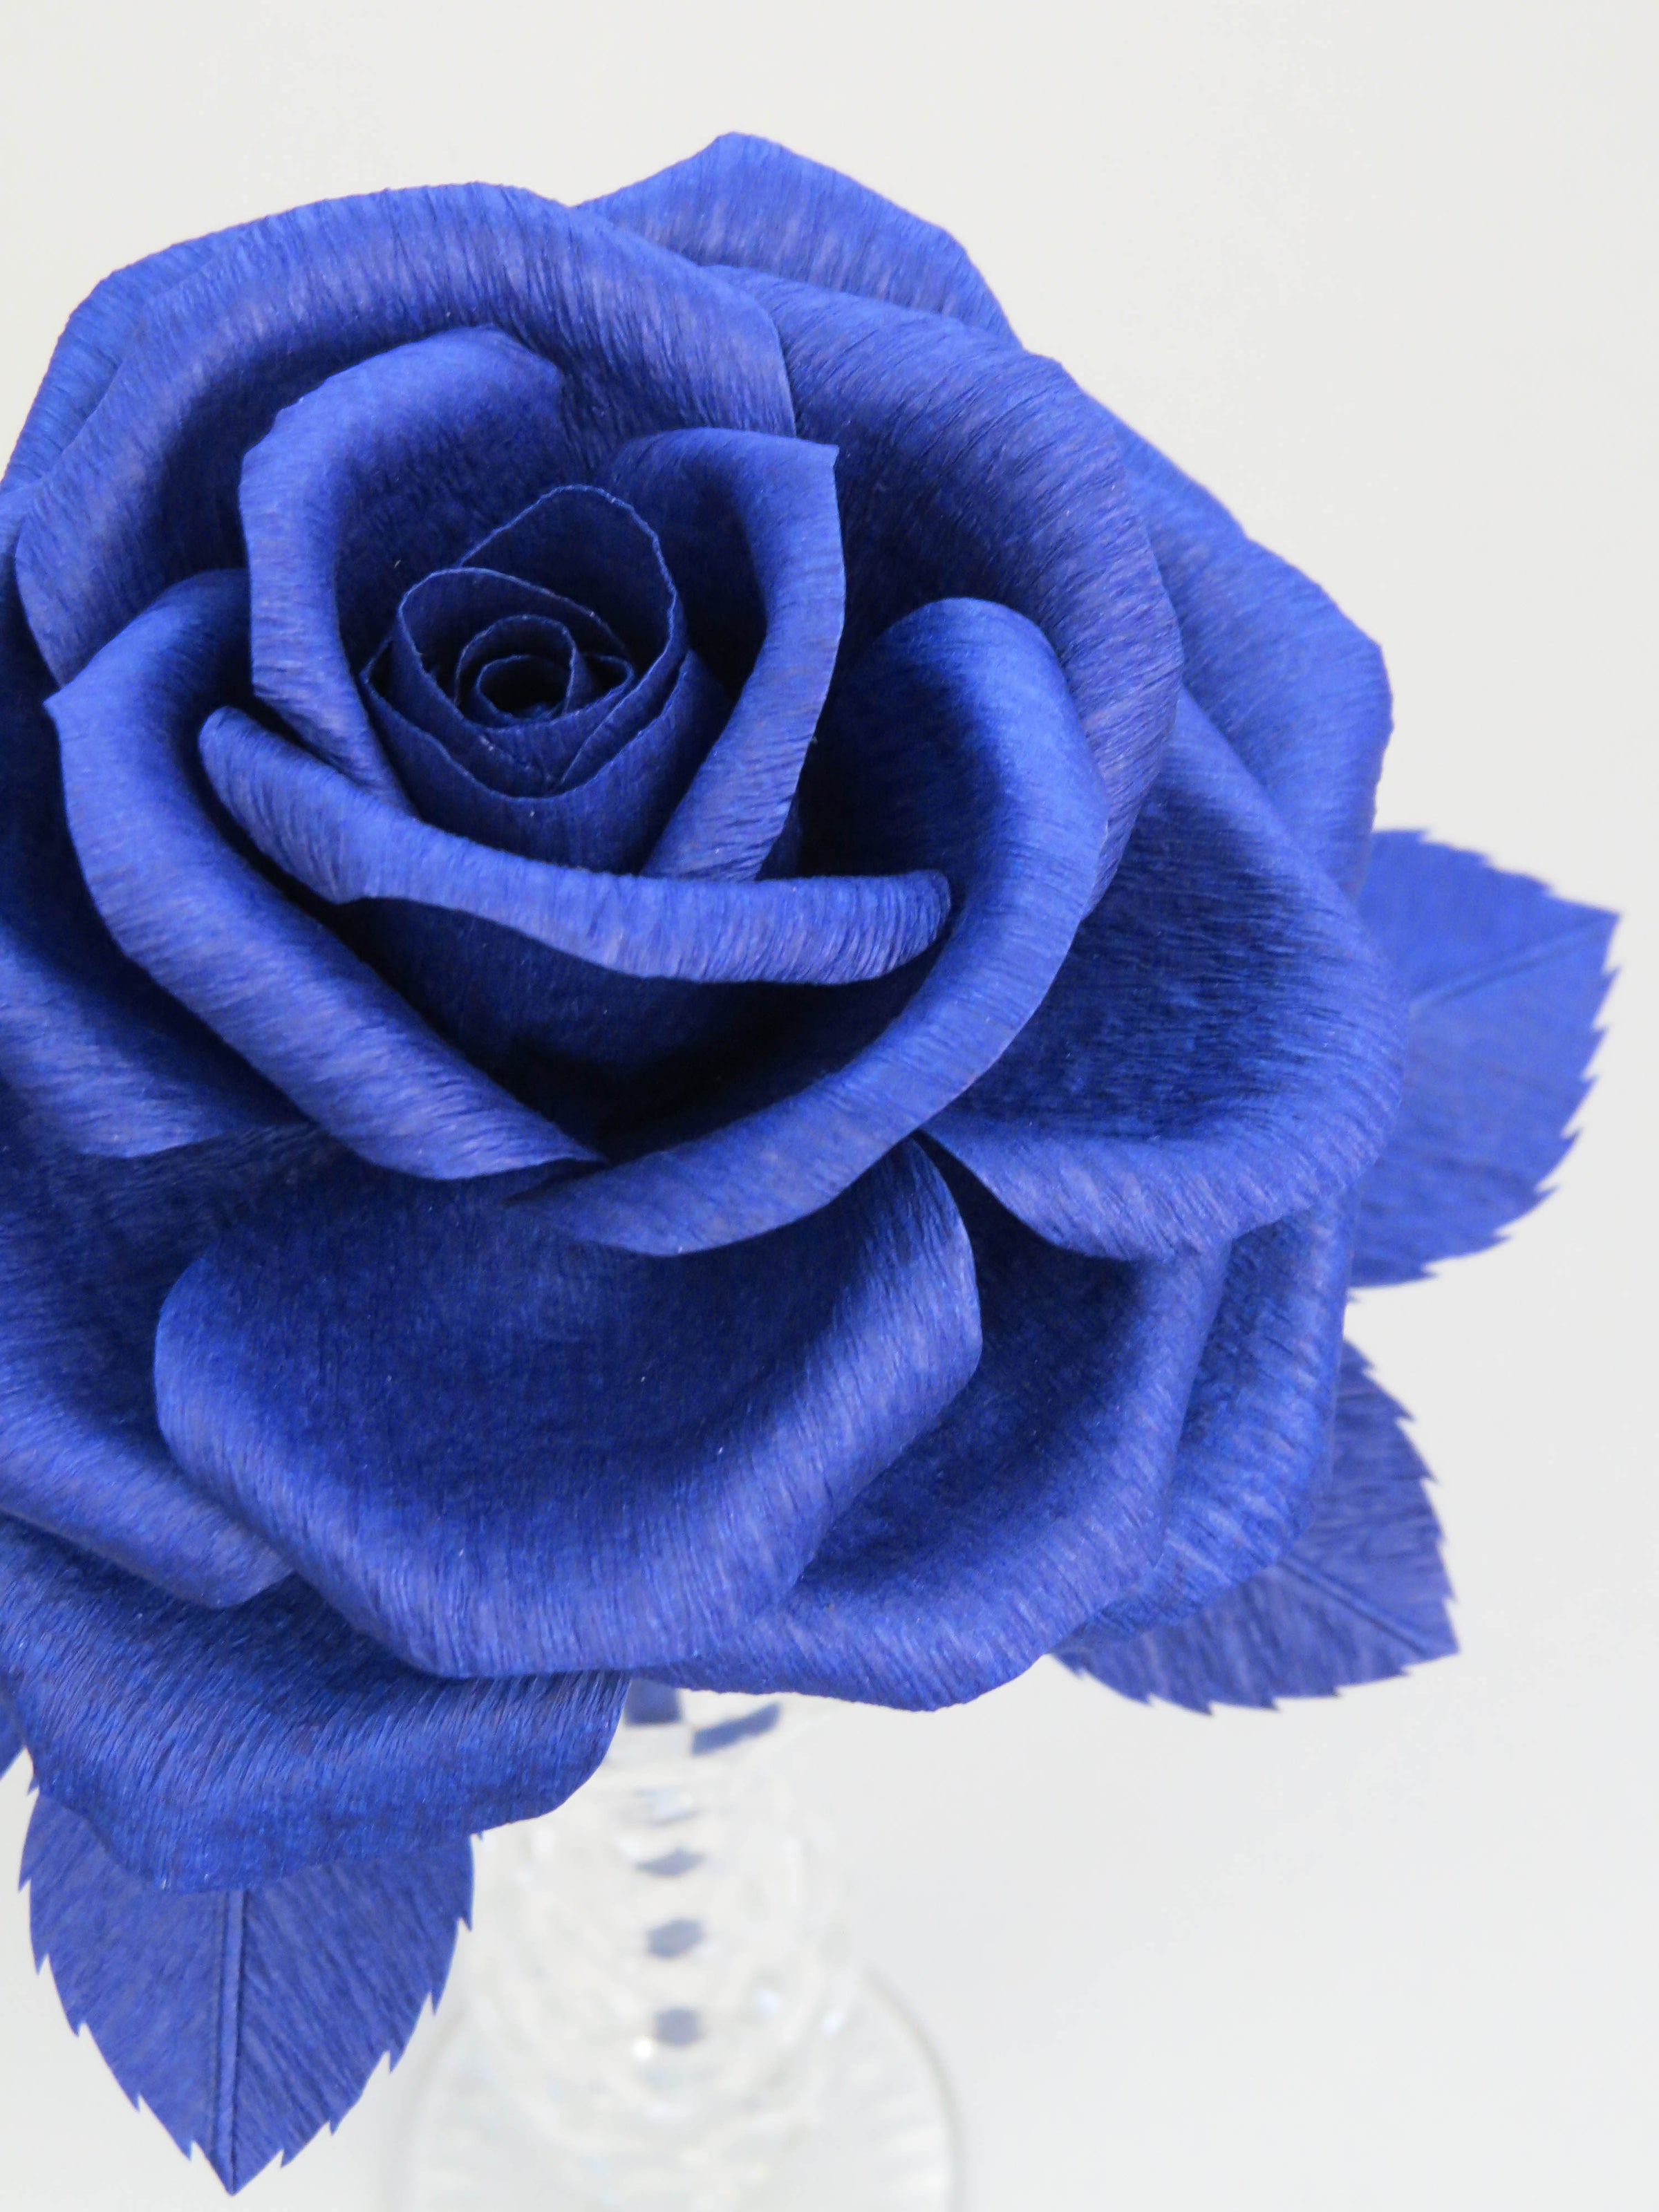 Close up detail of the texture on the petals of a sapphire blue crepe paper rose